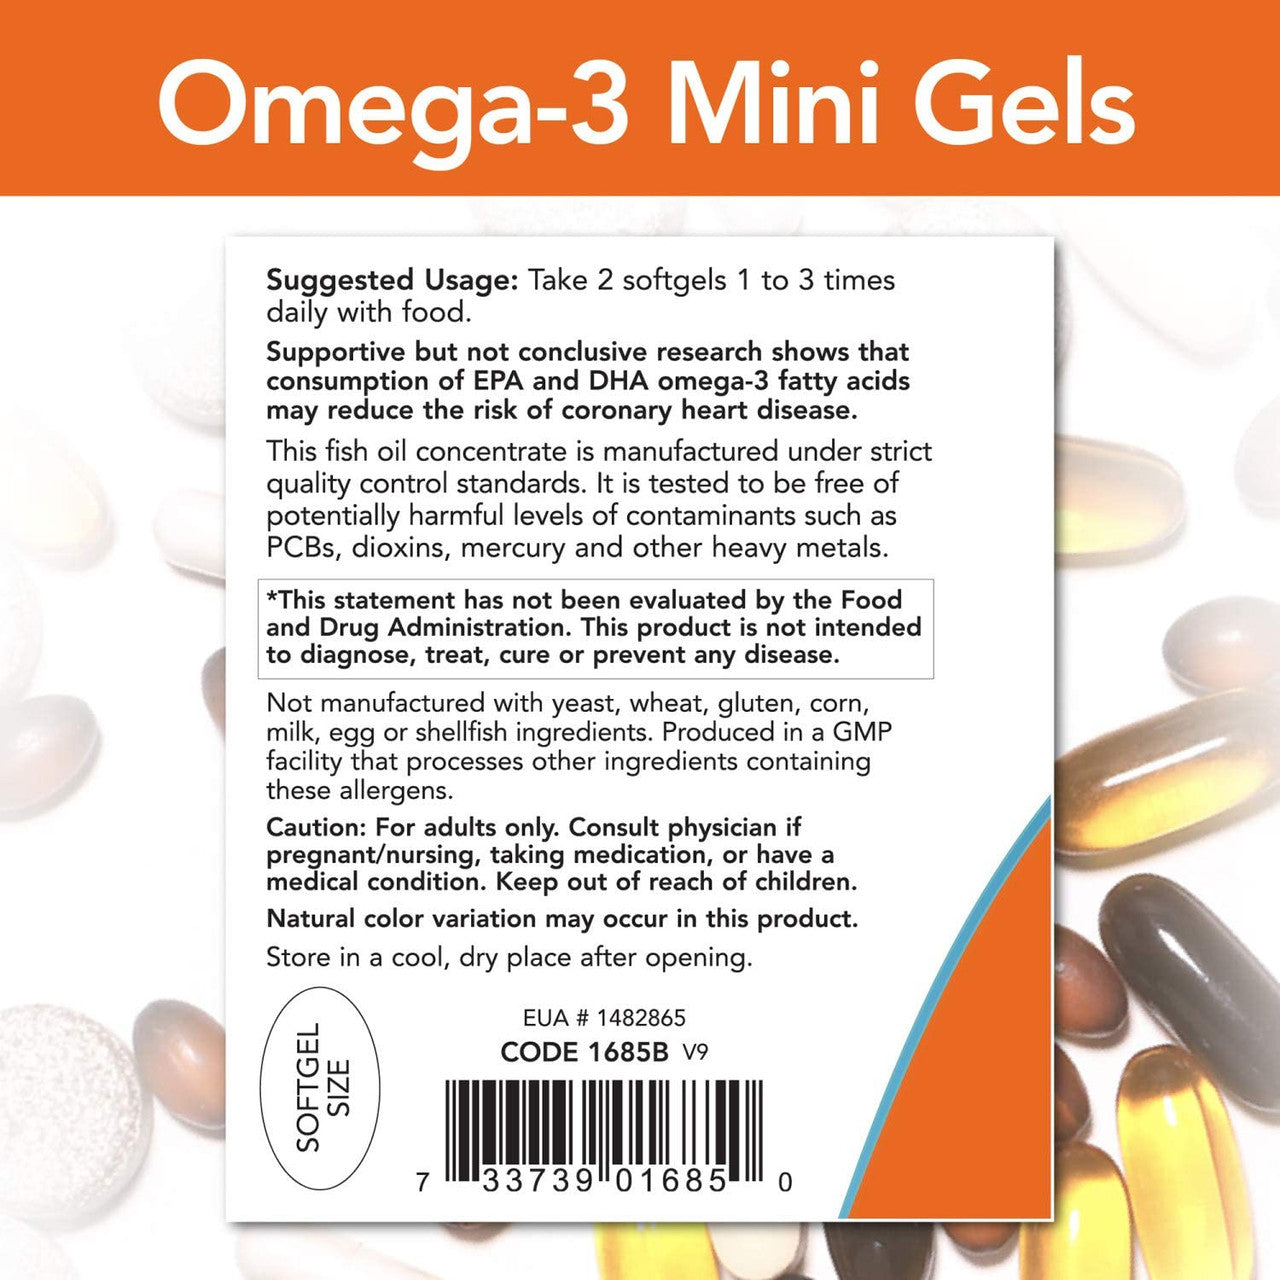 Now Omega-3 Mini Gels directions